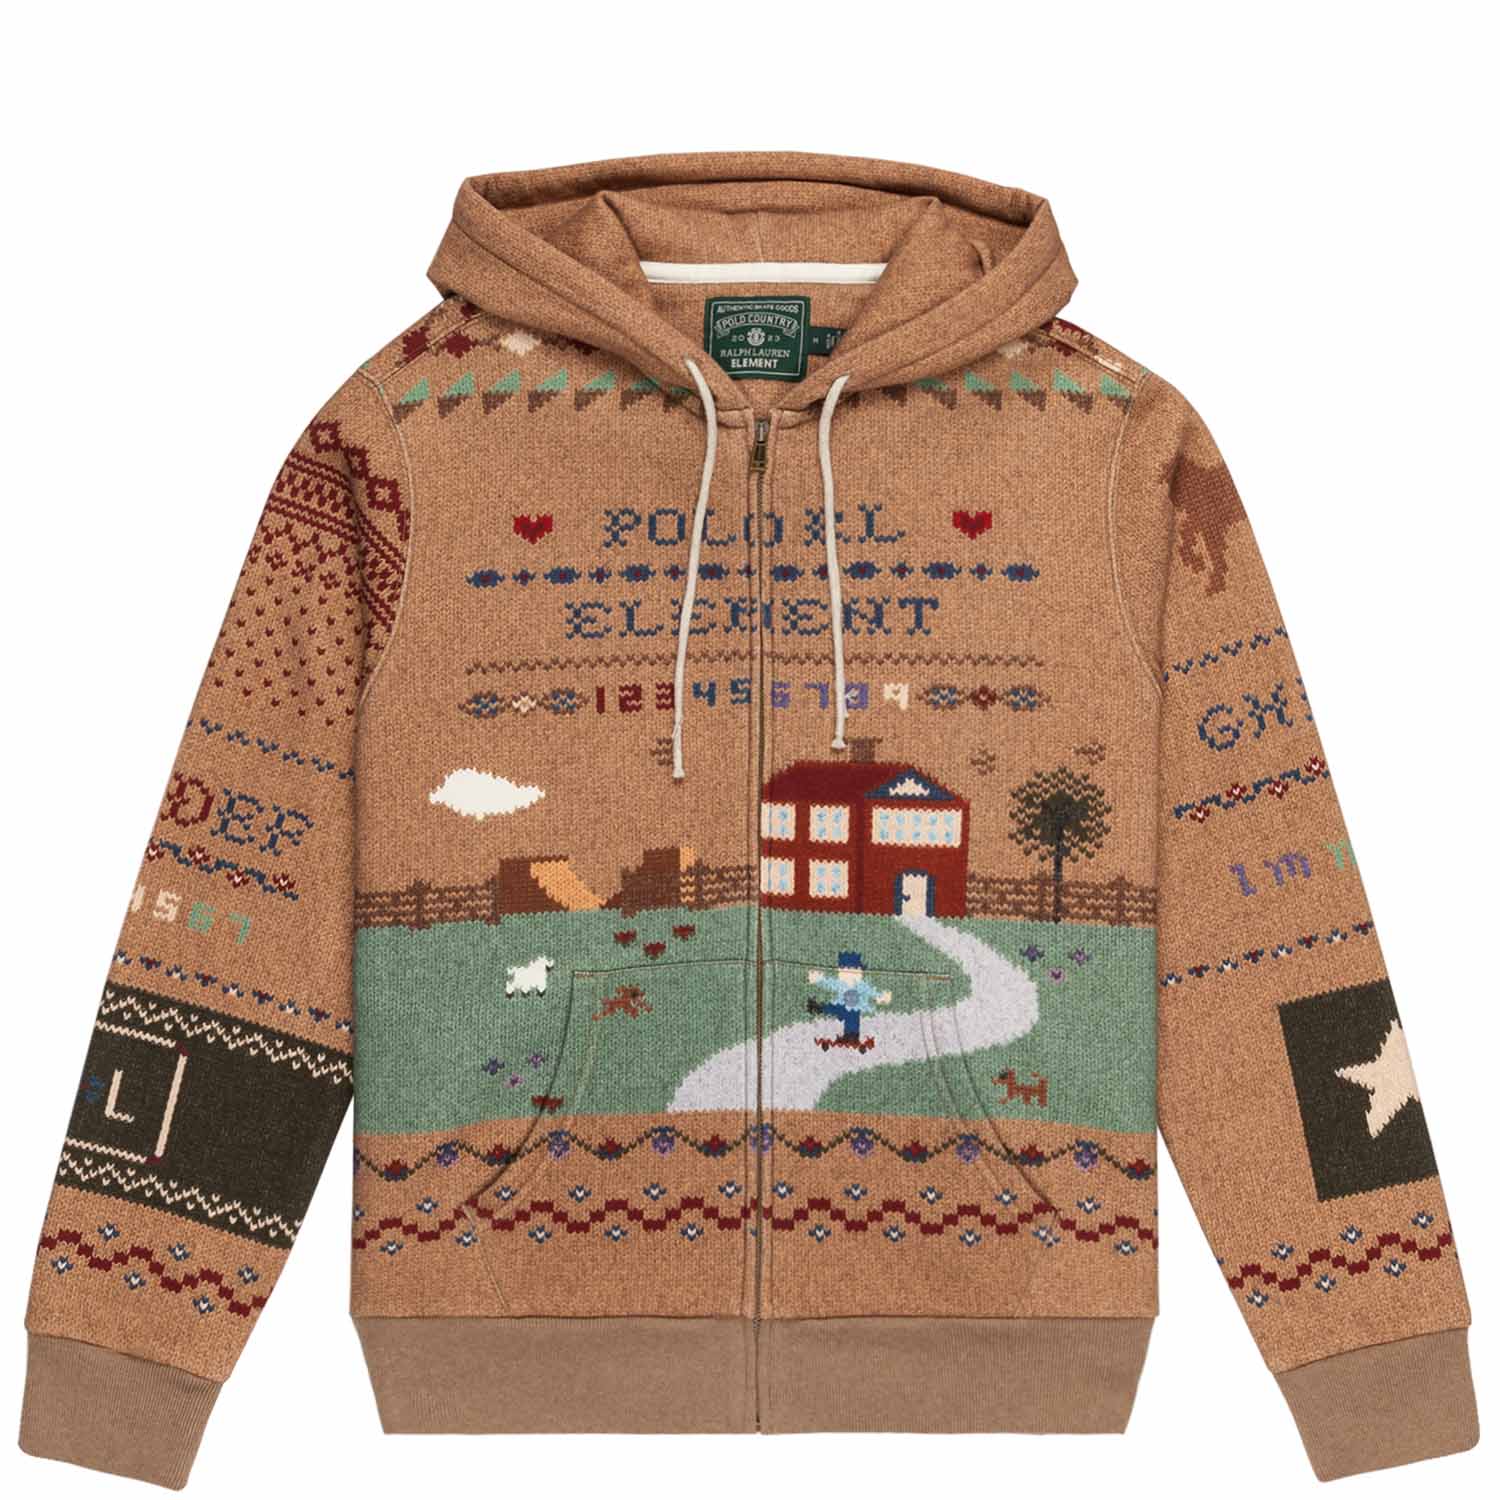 Polo Ralph Lauren x Element Zip up Hoodie in Brown with printed sweater graphic. Warm colors in red, brown, tan, green, and some navy. Image on hoodie is a skateboarder pushing to a mini ramp with the image looking like it is a hand made sweater.